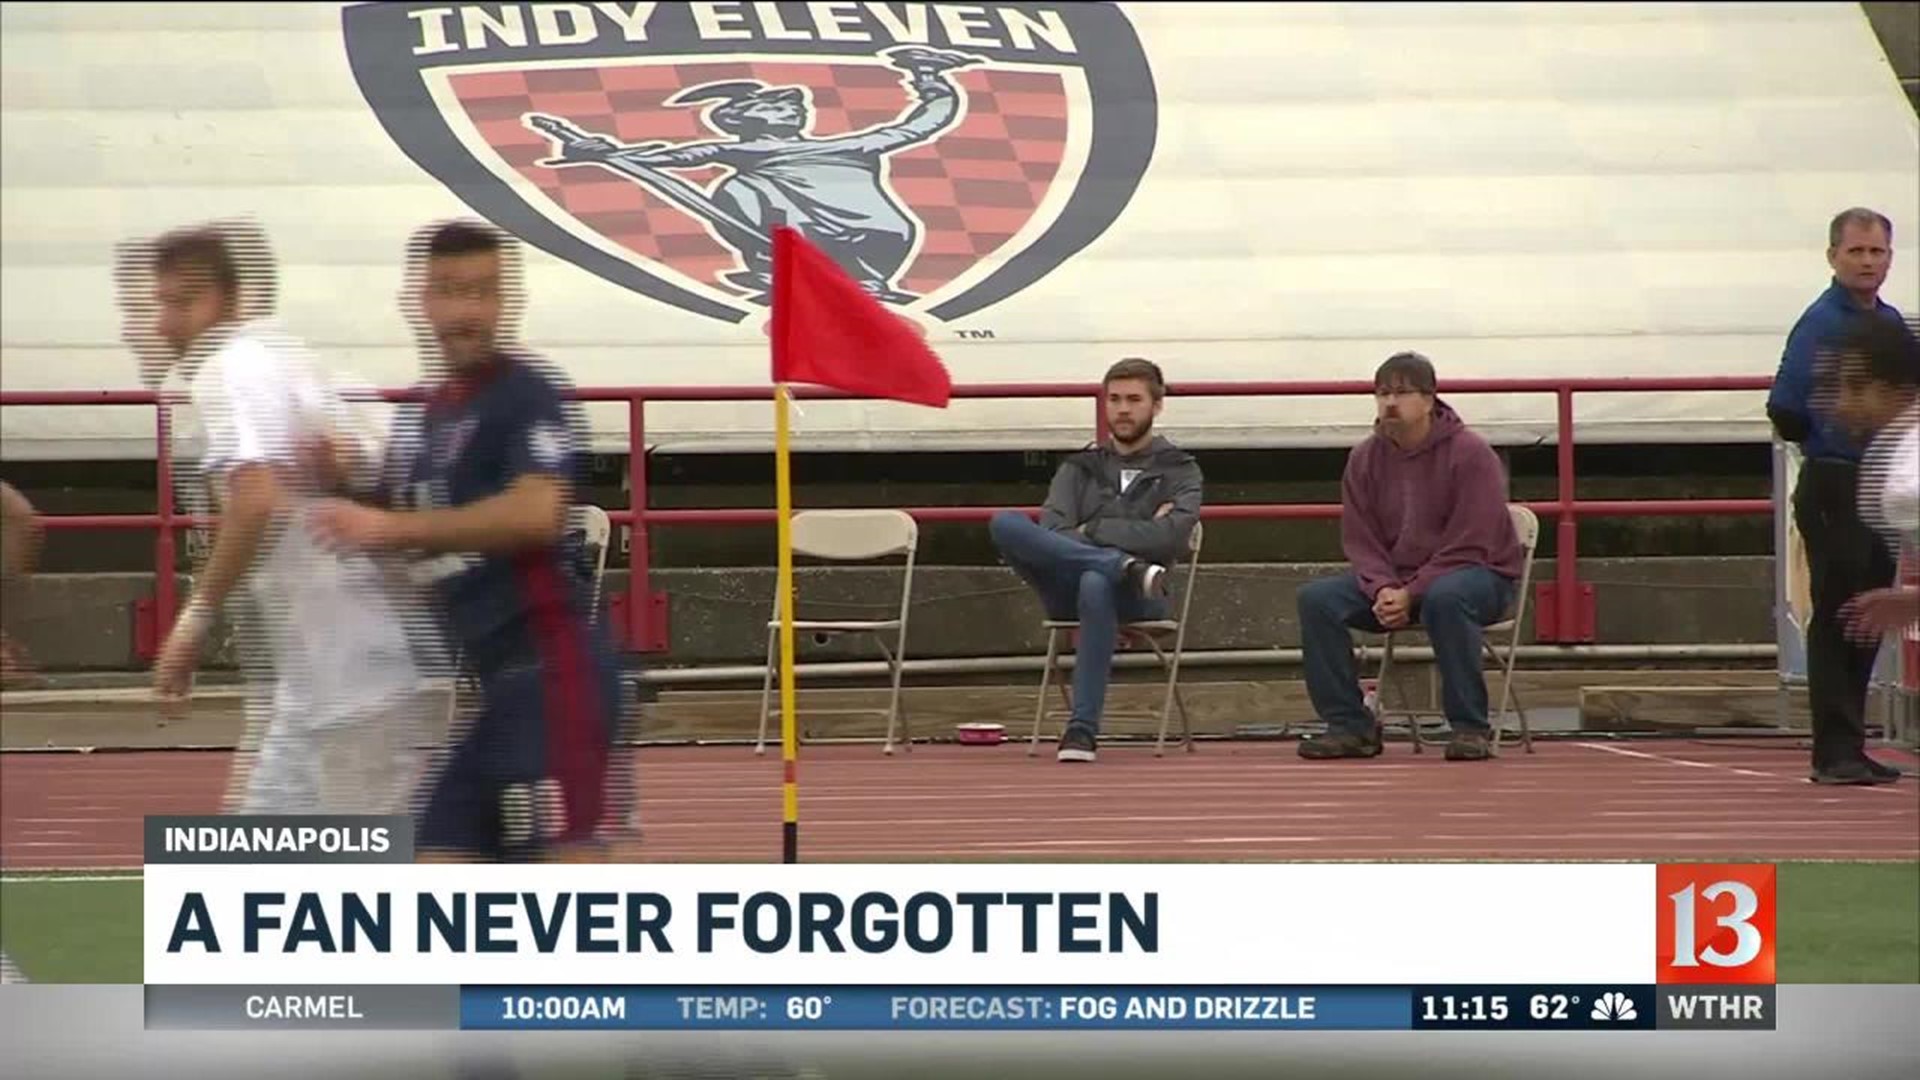 Indy Eleven fans remember one of their own